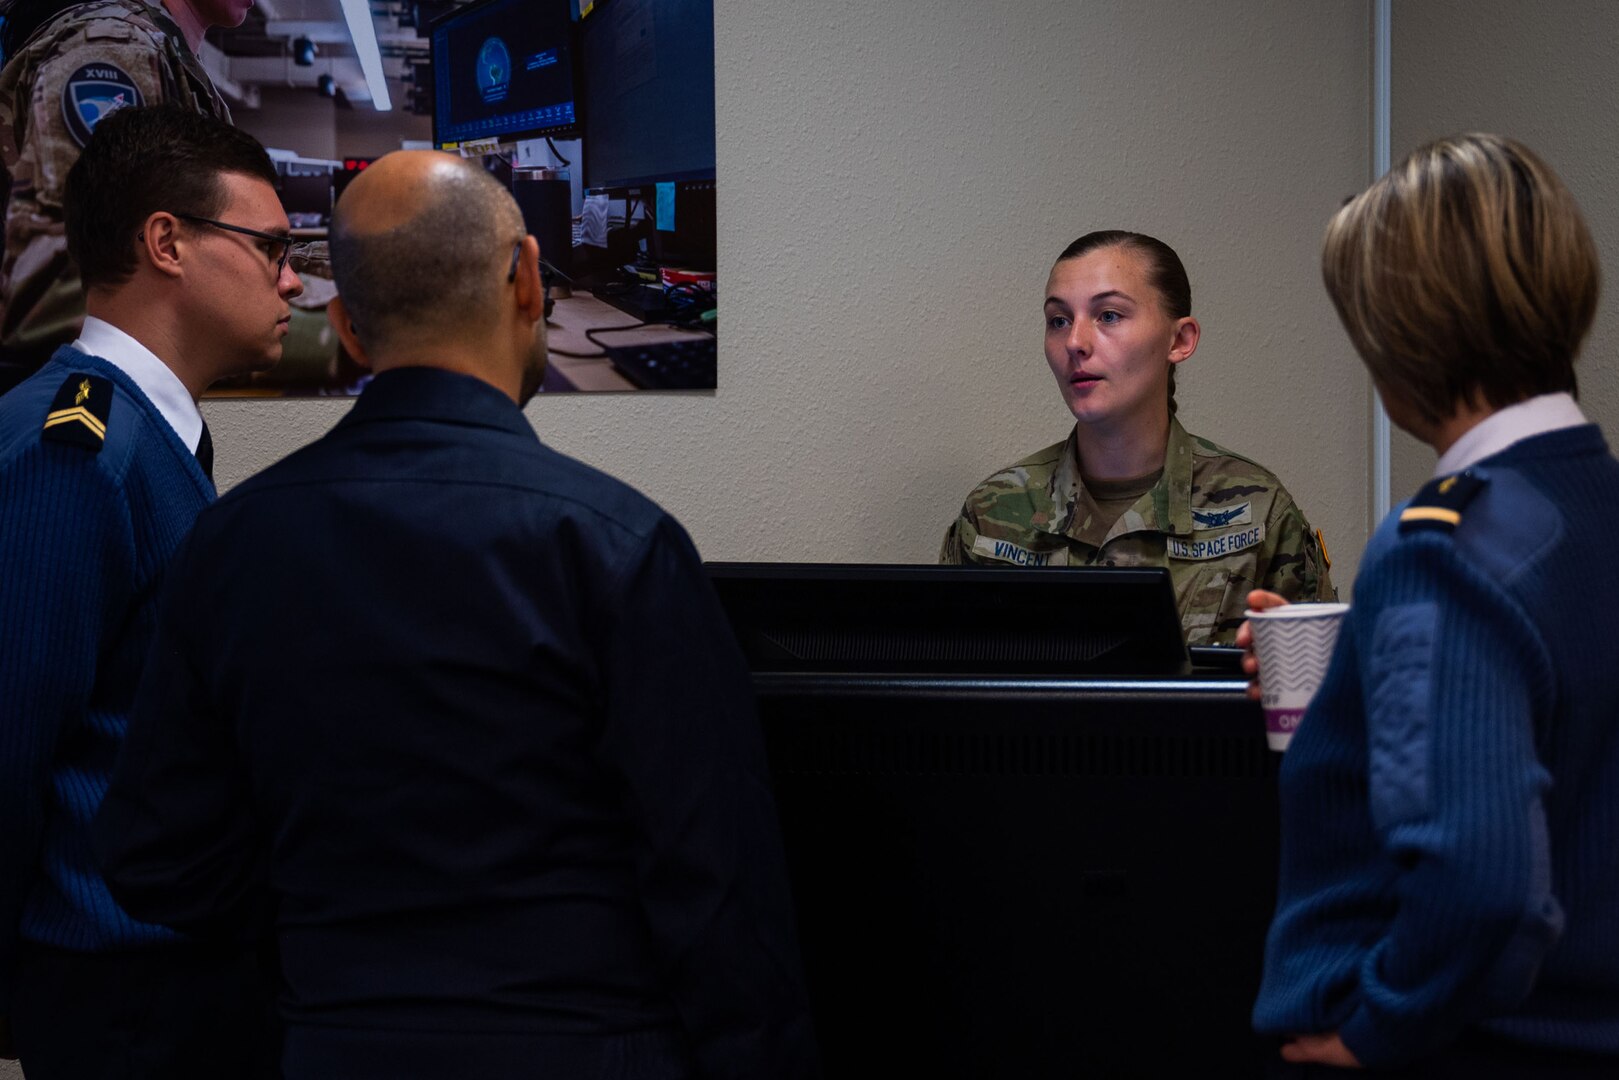 U.S. Space Force Sgt. Brianna Vincent, 18th Space Defense Squadron (18 SDS) Space Situational Awareness (SSA) coordinator and lead planner for the COSMOS exchange, speaks with French space operators from the Operational Center for Military Surveillance of Space Objects (COSMOS) during an Operator Exchange event at Vandenberg Space Force Base, Calif., Oct. 4, 2022. The 4-day event aimed to advance global space domain awareness between the two groups by exchanging common practices, spotlighting mission capabilities, and explaining methodologies of their respective programs. (U.S. Space Force photo by Tech. Sgt. Luke Kitterman)